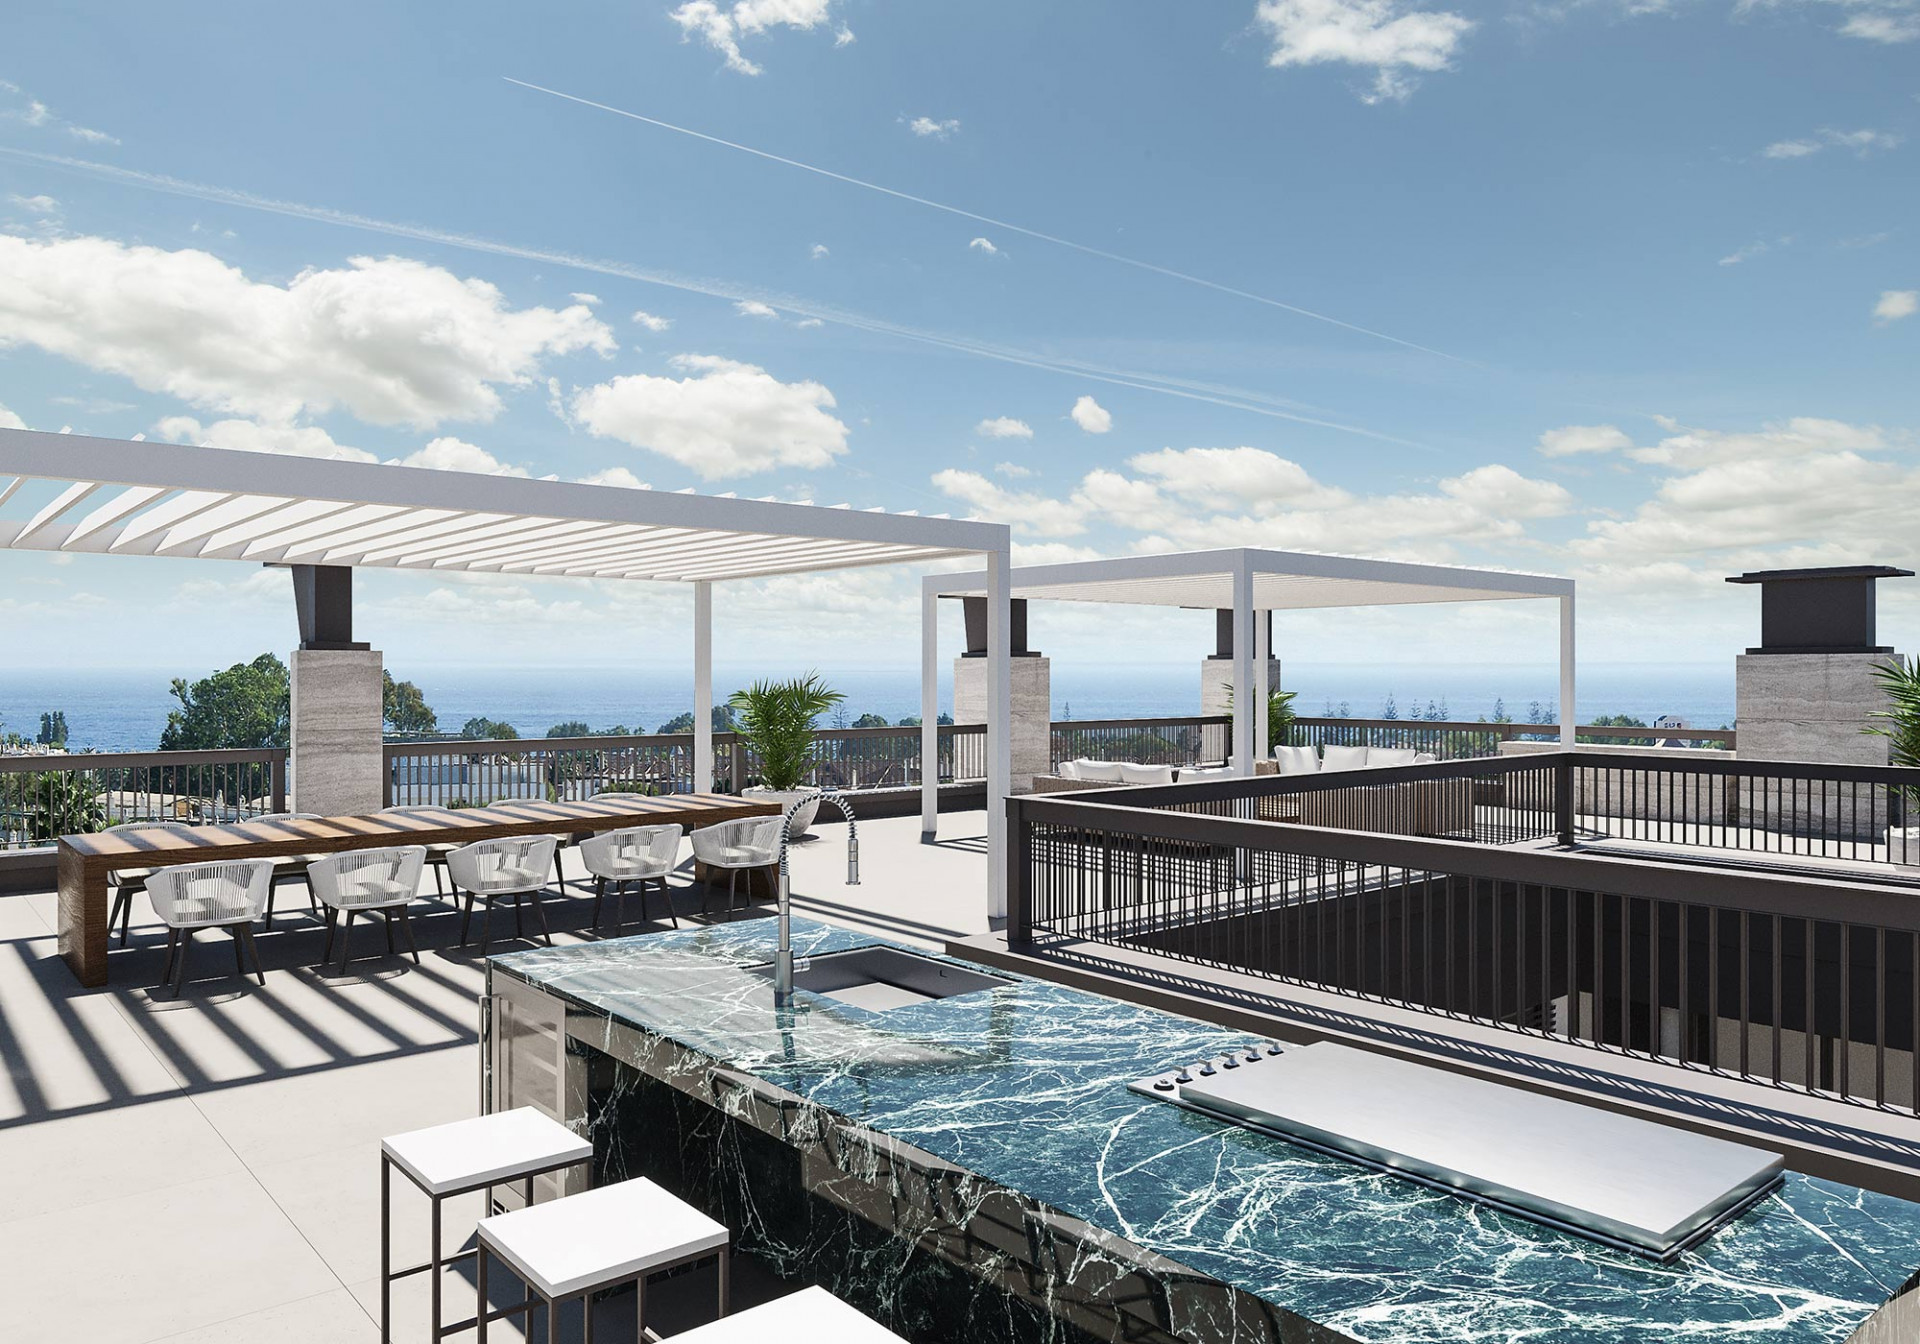 Palacetes de Banús: New luxury residential complex with panoramic views of the Mediterranean Sea, Puerto Banus and the mountains. | Image 14